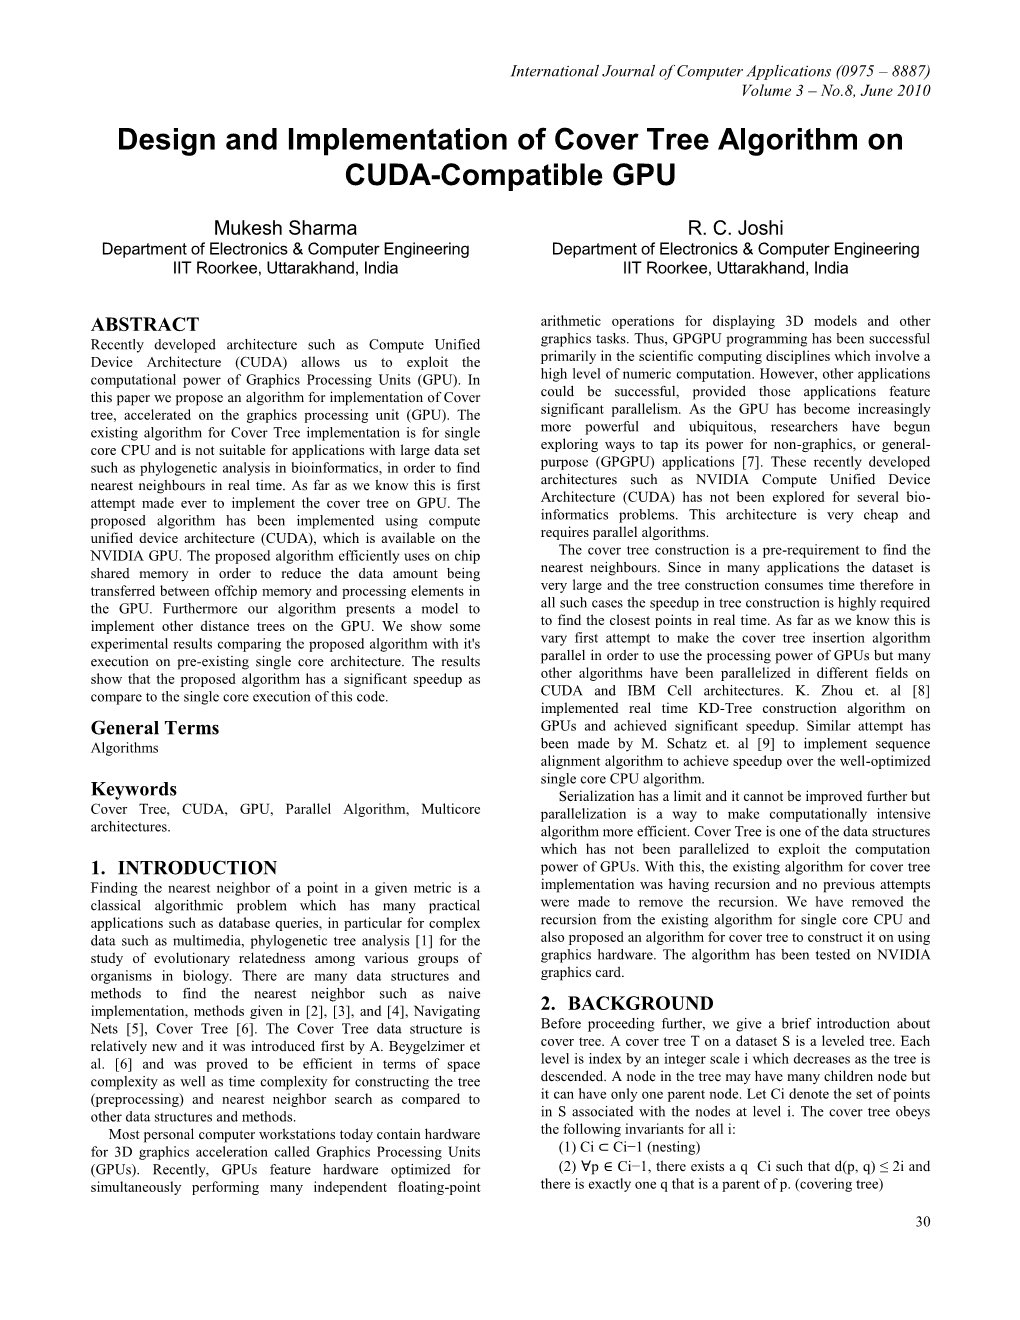 Design and Implementation of Cover Tree Algorithm on CUDA-Compatible GPU